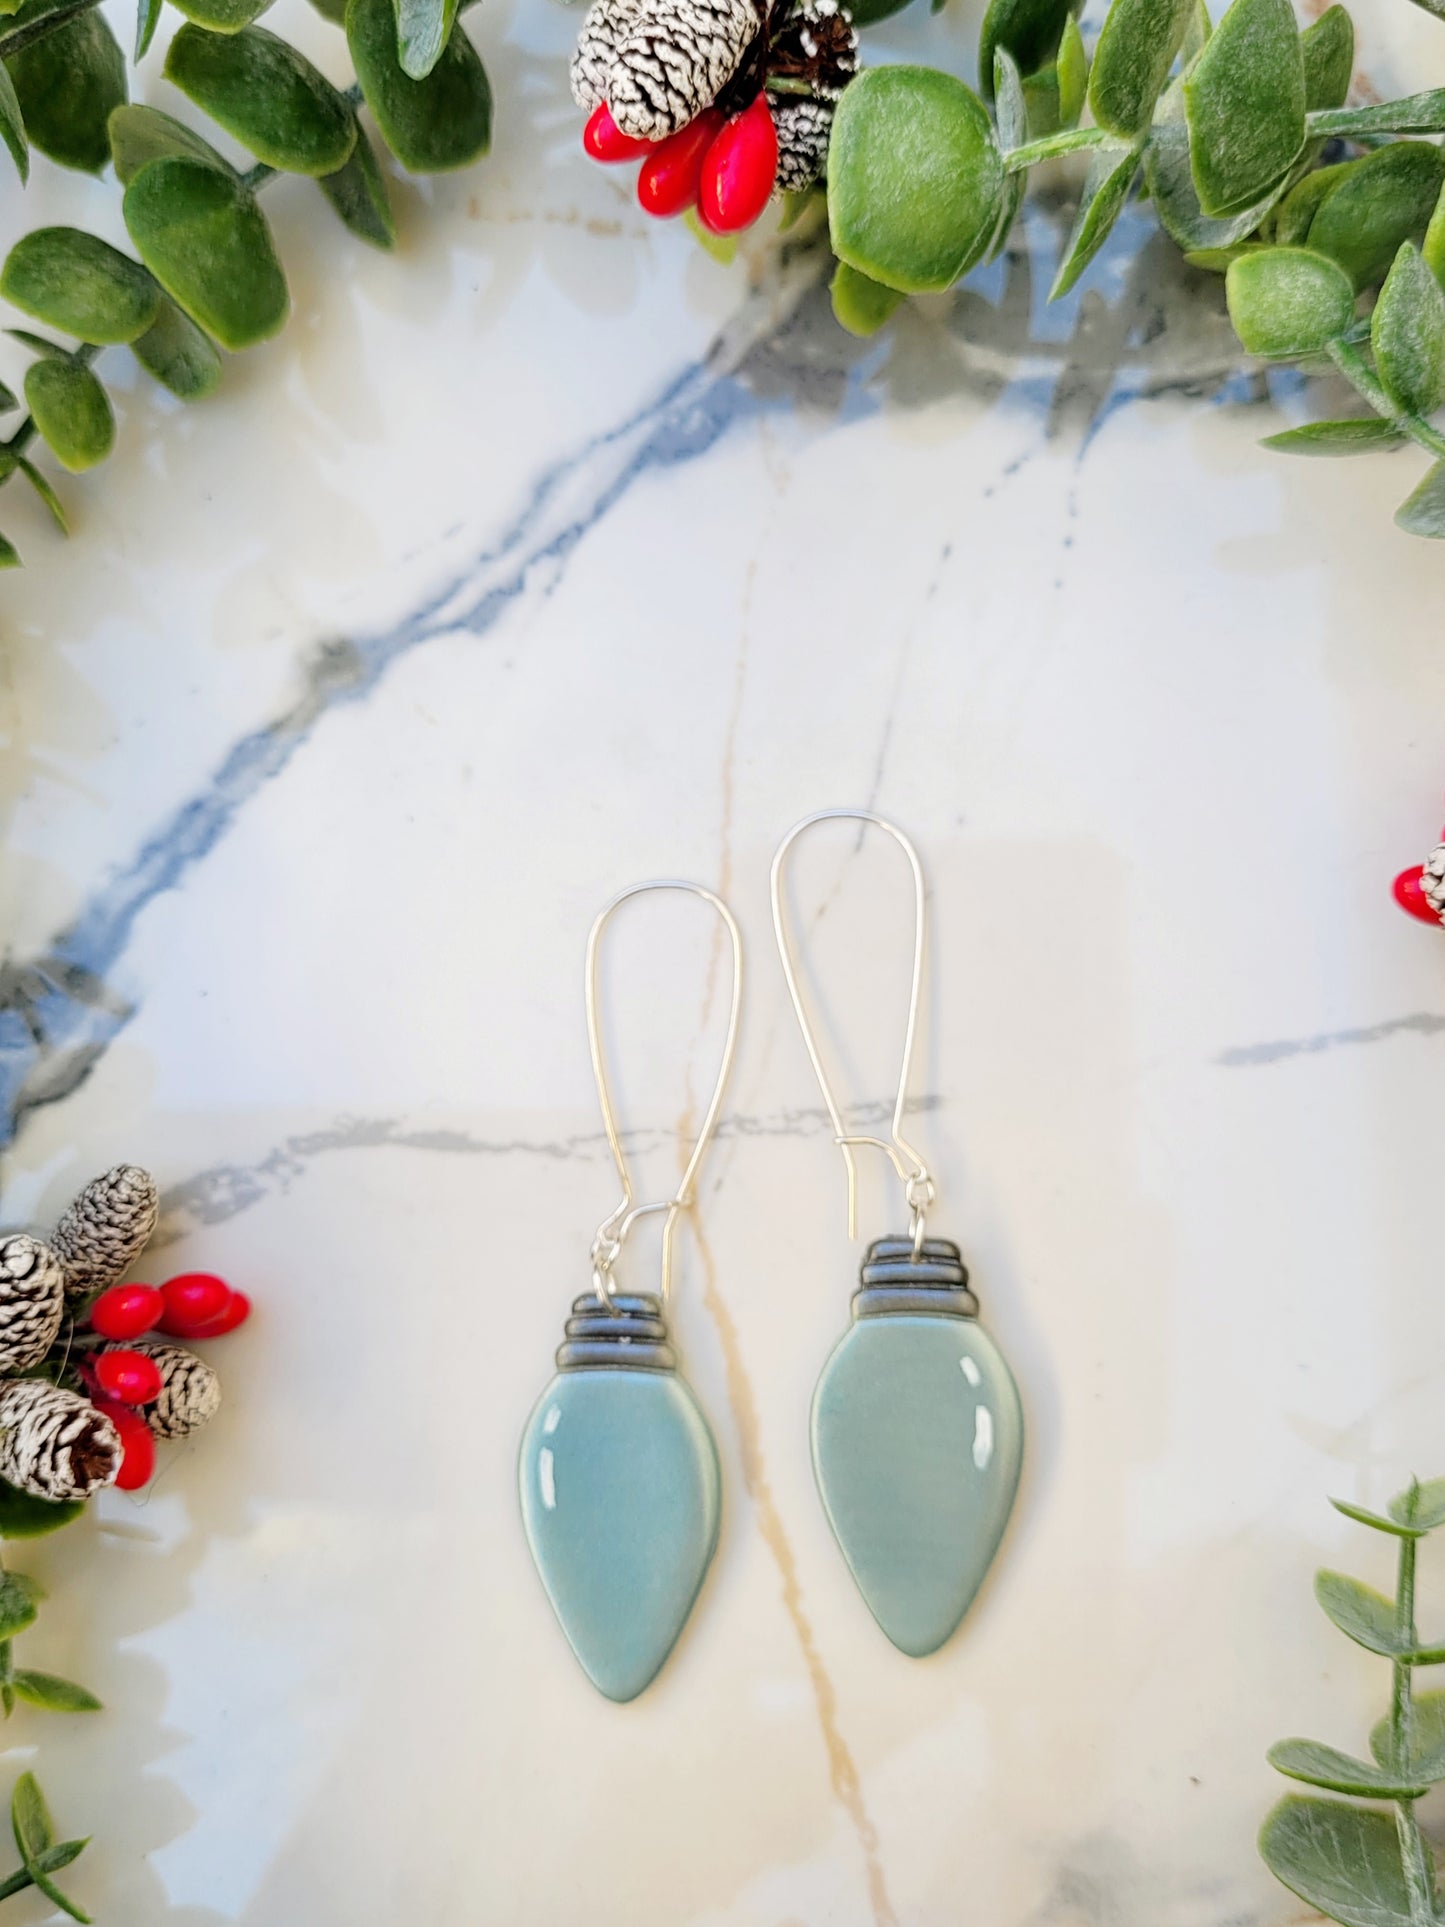 close up of blue christmas lightbulb earrings on a marble background surrounded by foliage.